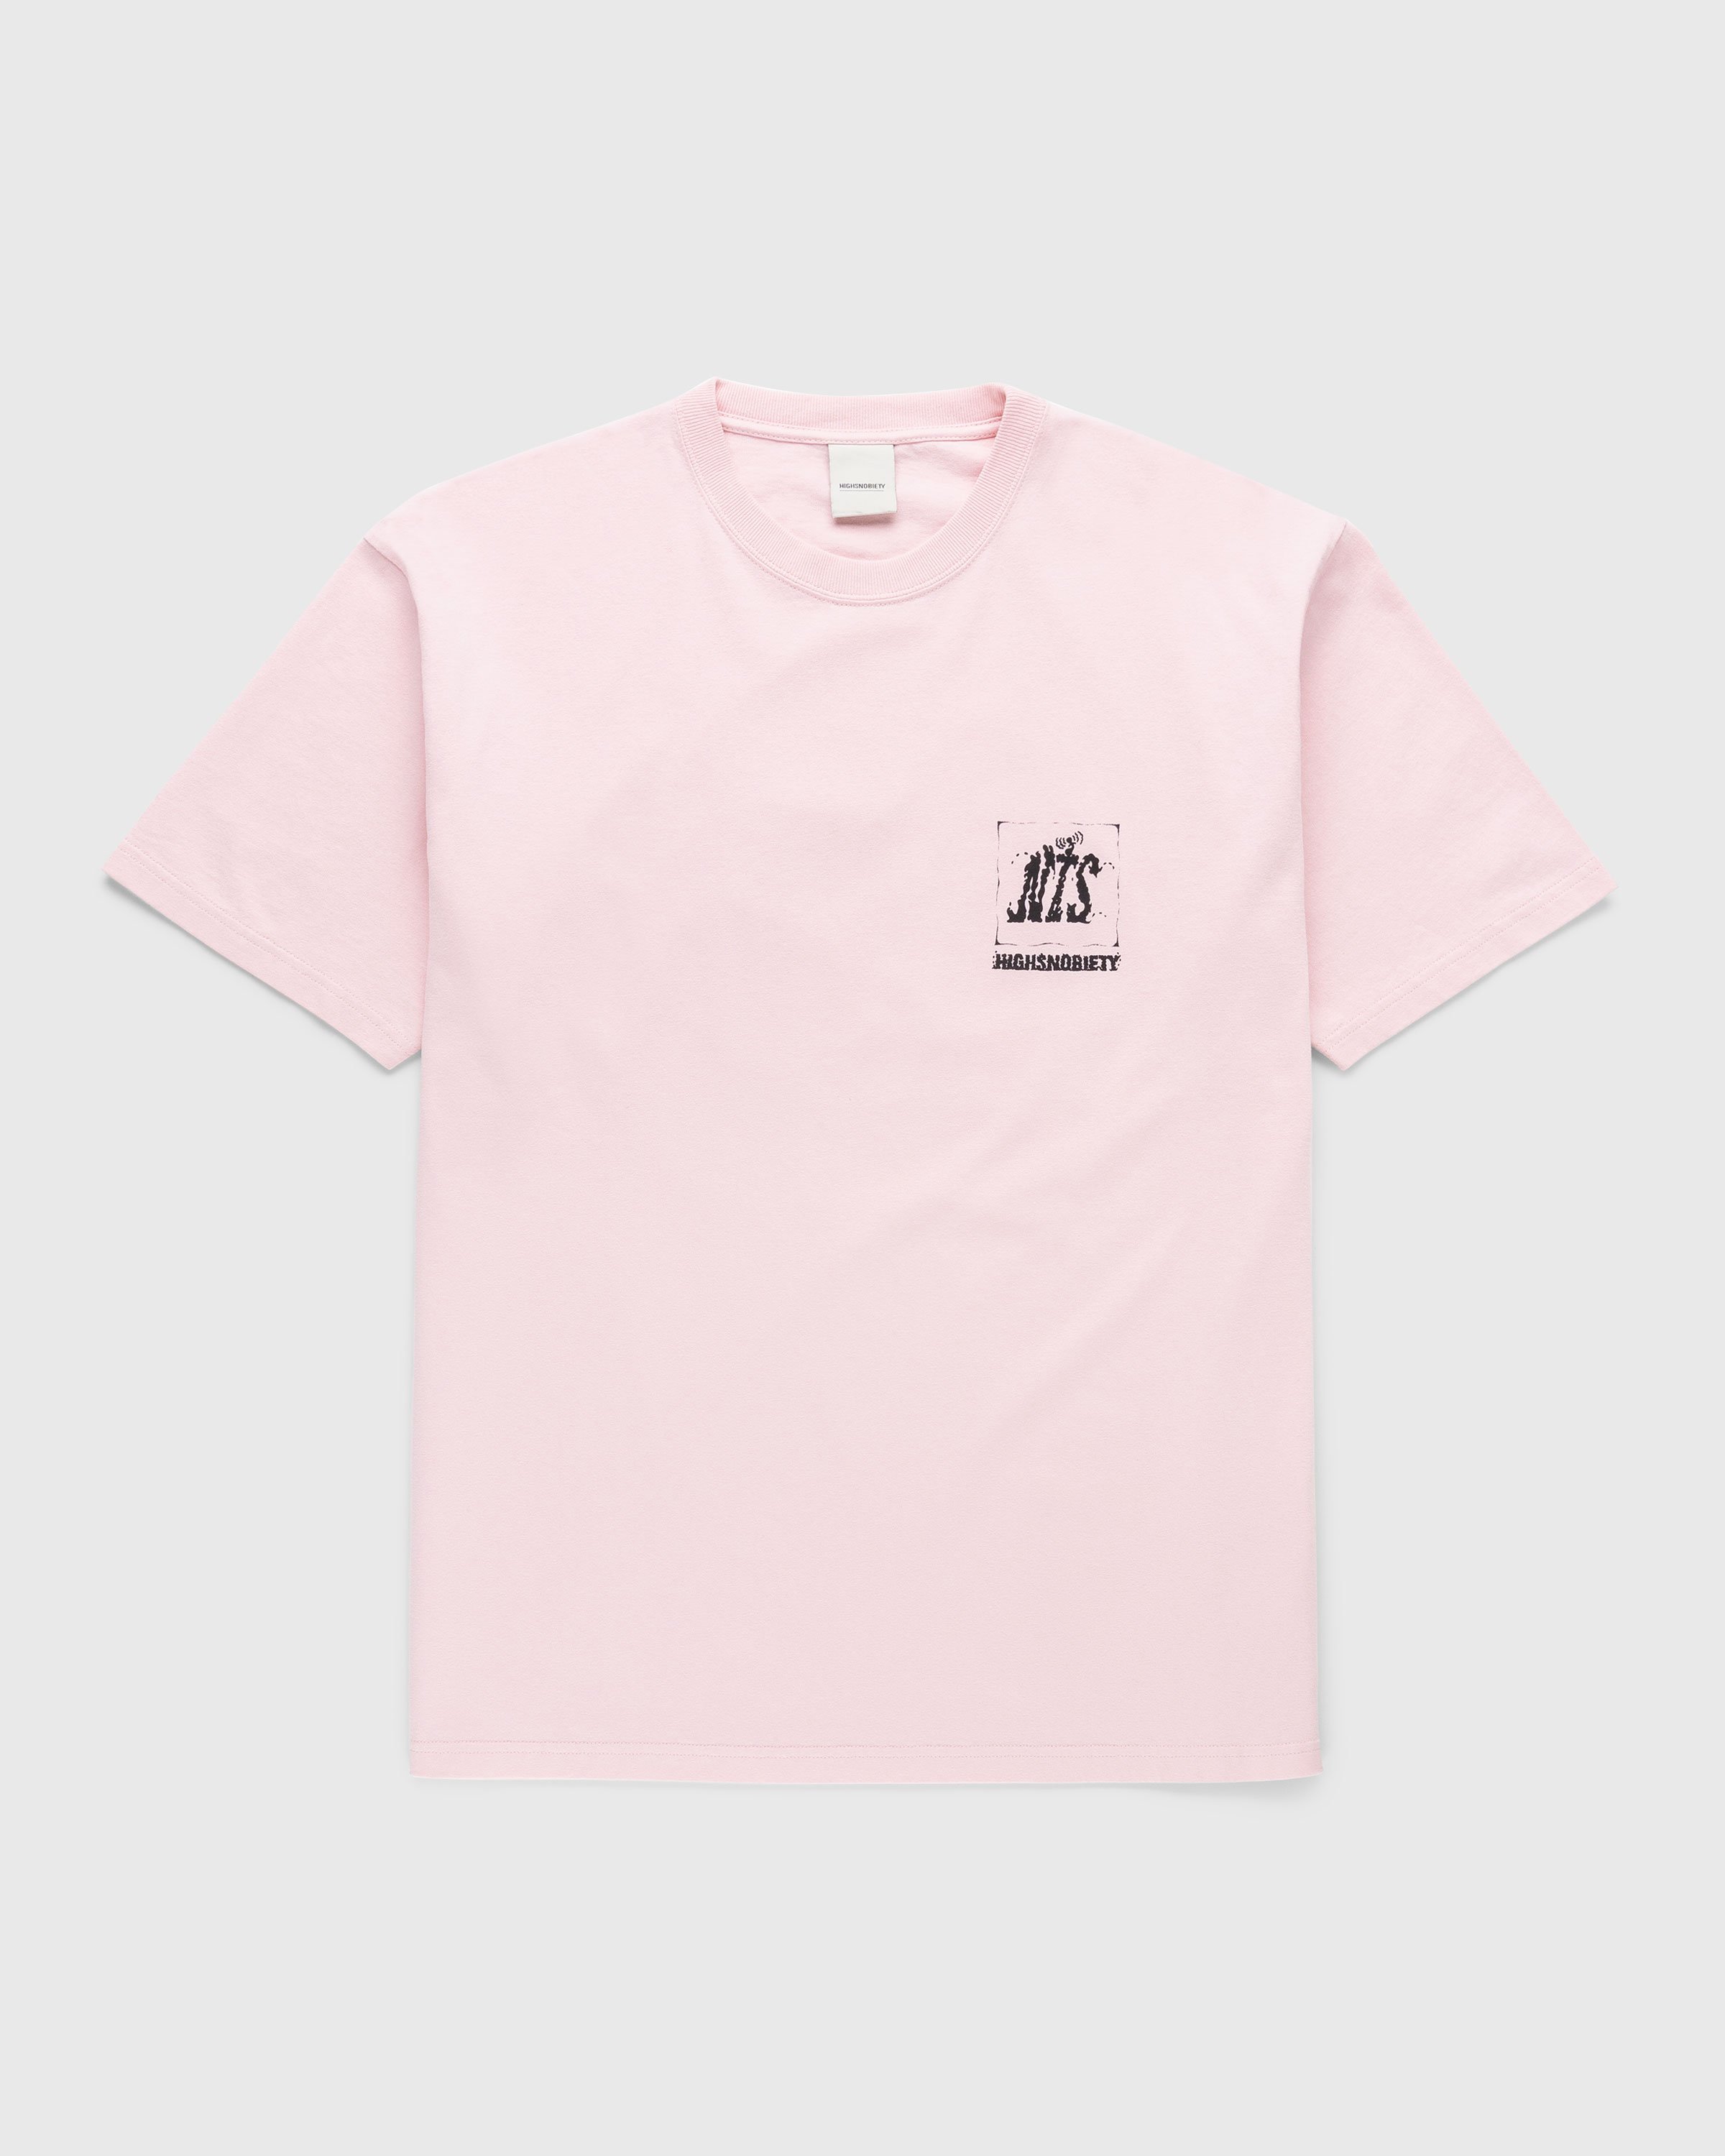 NTS x Highsnobiety - Graphic T-Shirt Pink - Clothing - Pink - Image 2